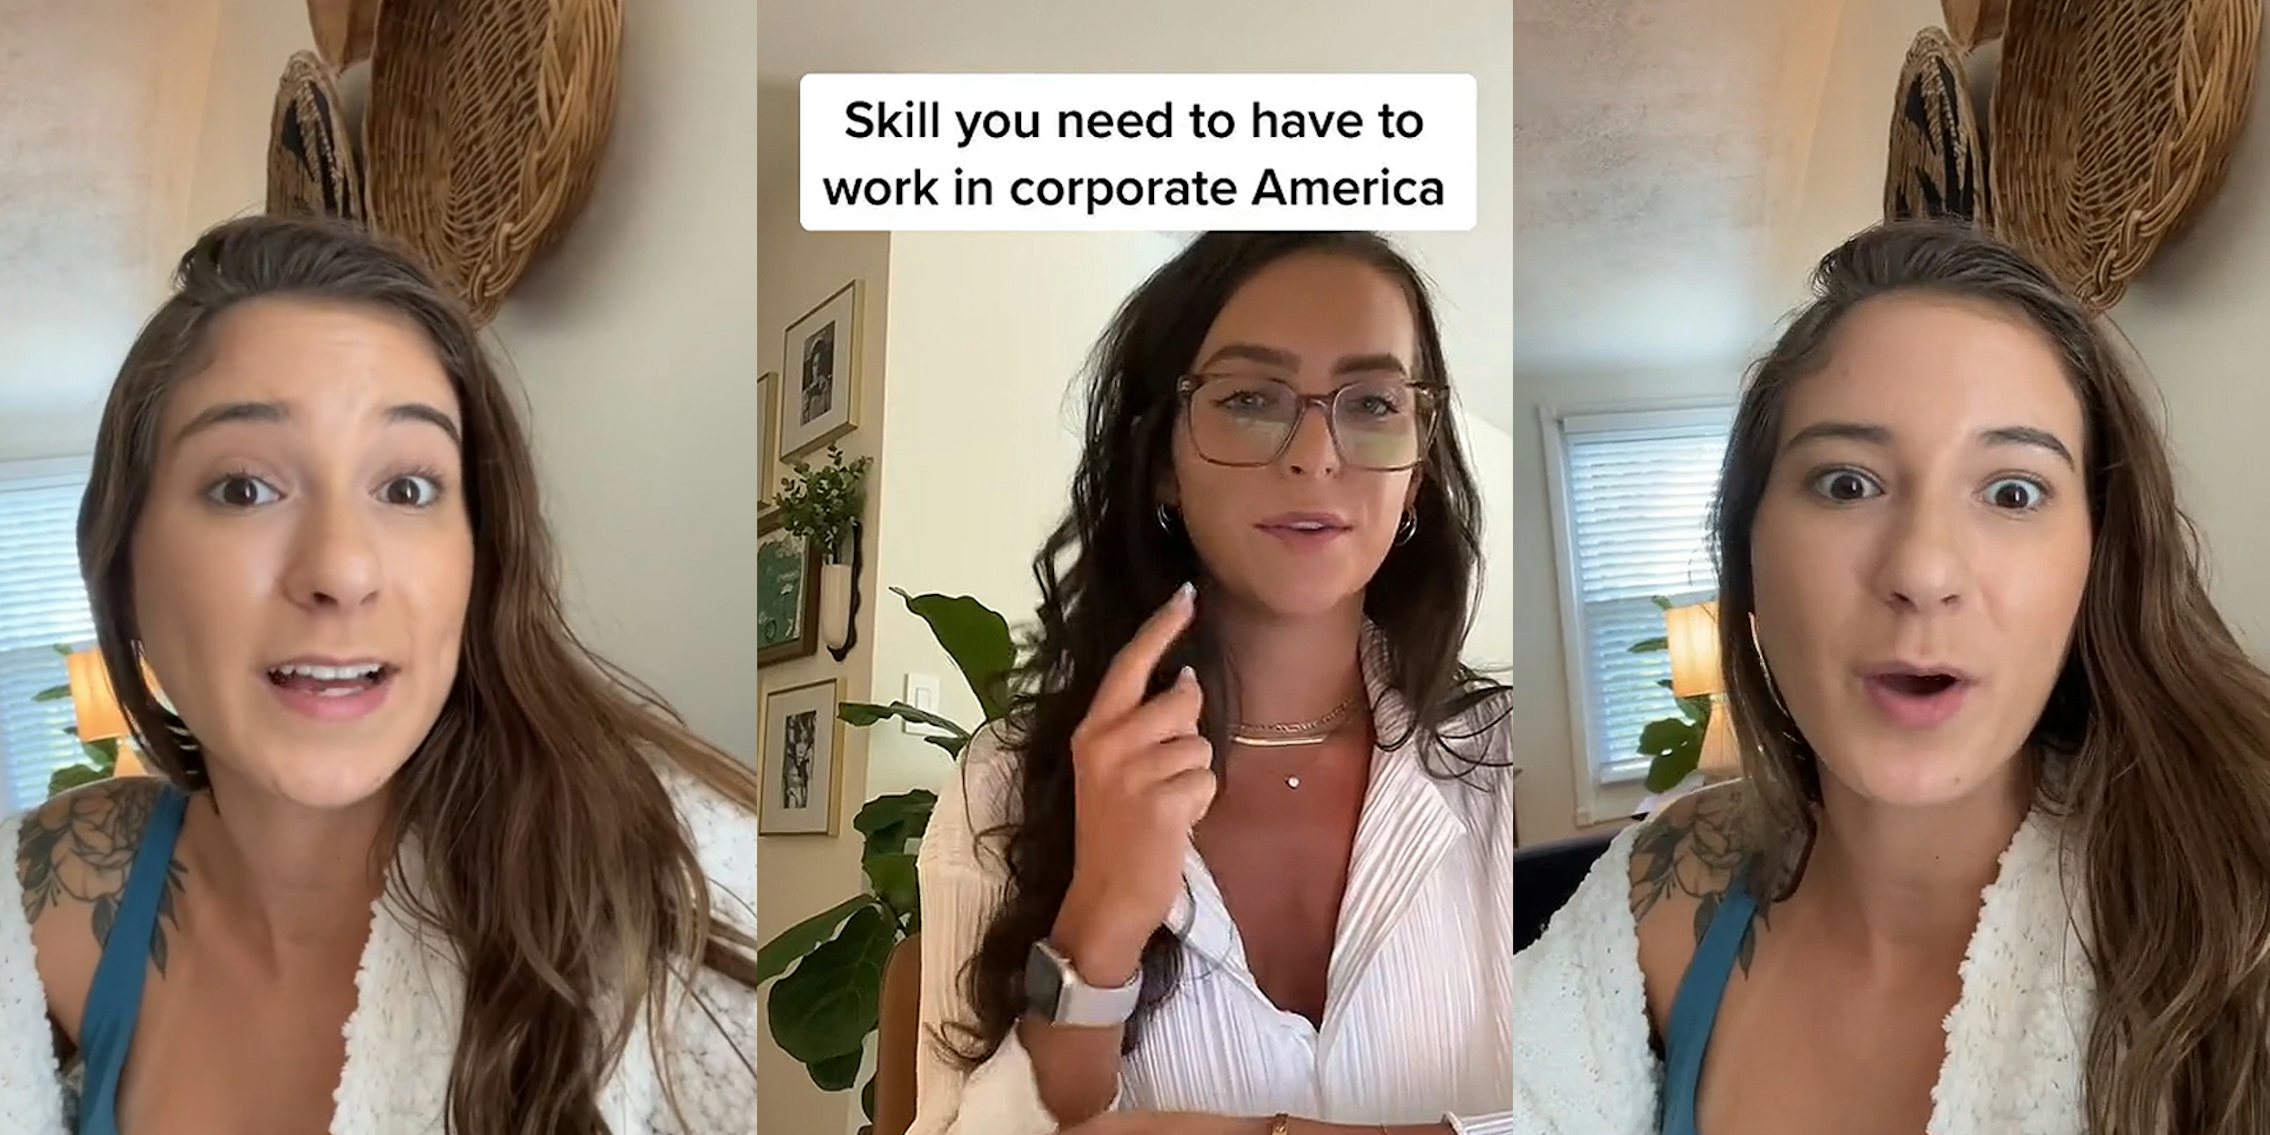 woman speaking (l) woman speaking pointing finger to caption 'Skill you need to have to work in corporate America' (c) woman speaking (r)